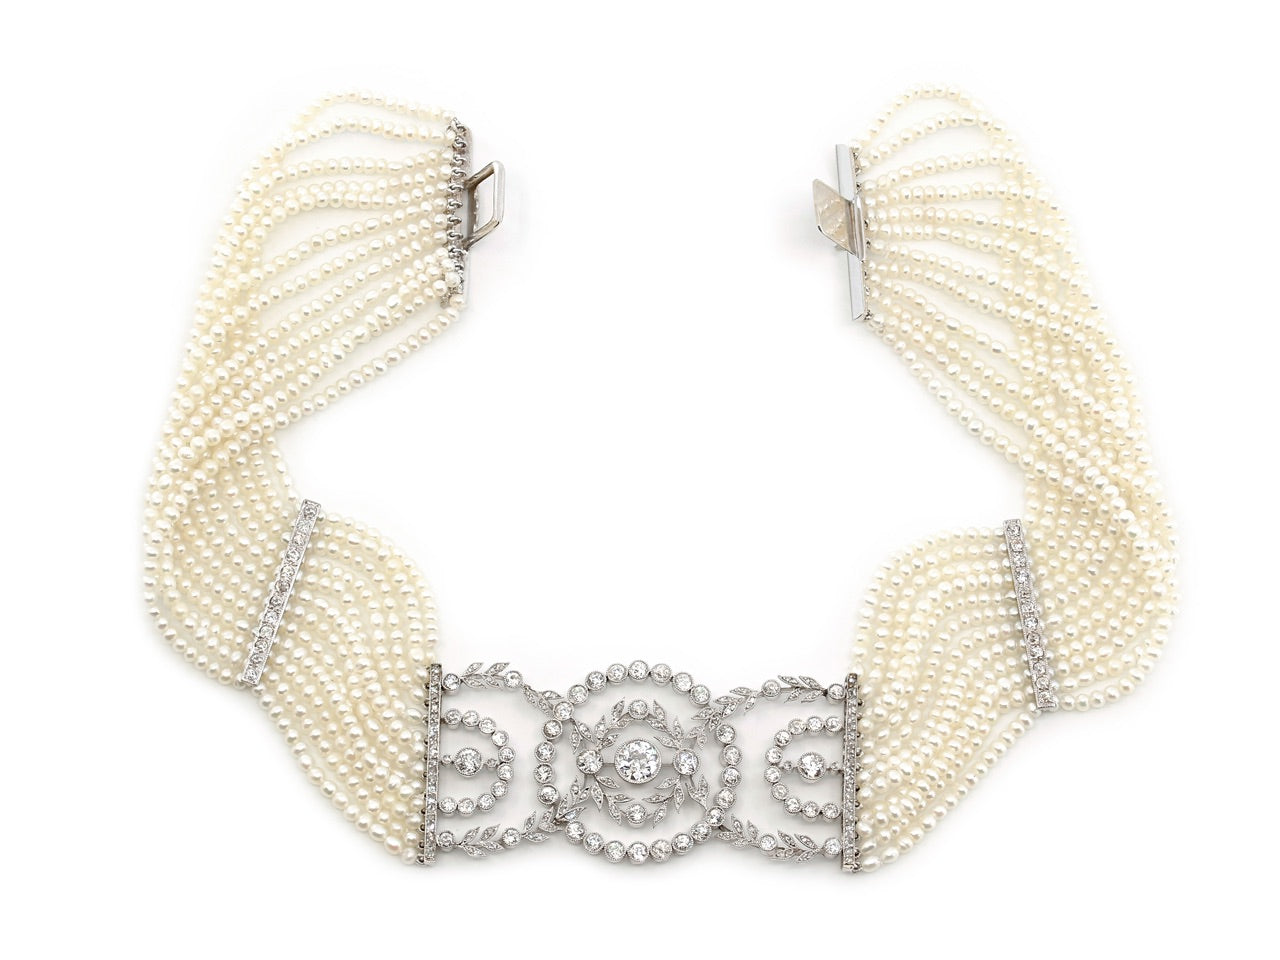 Edwardian Style Cultured Pearl, Natural Seed Pearl, and Diamond Choker in 18K White Gold